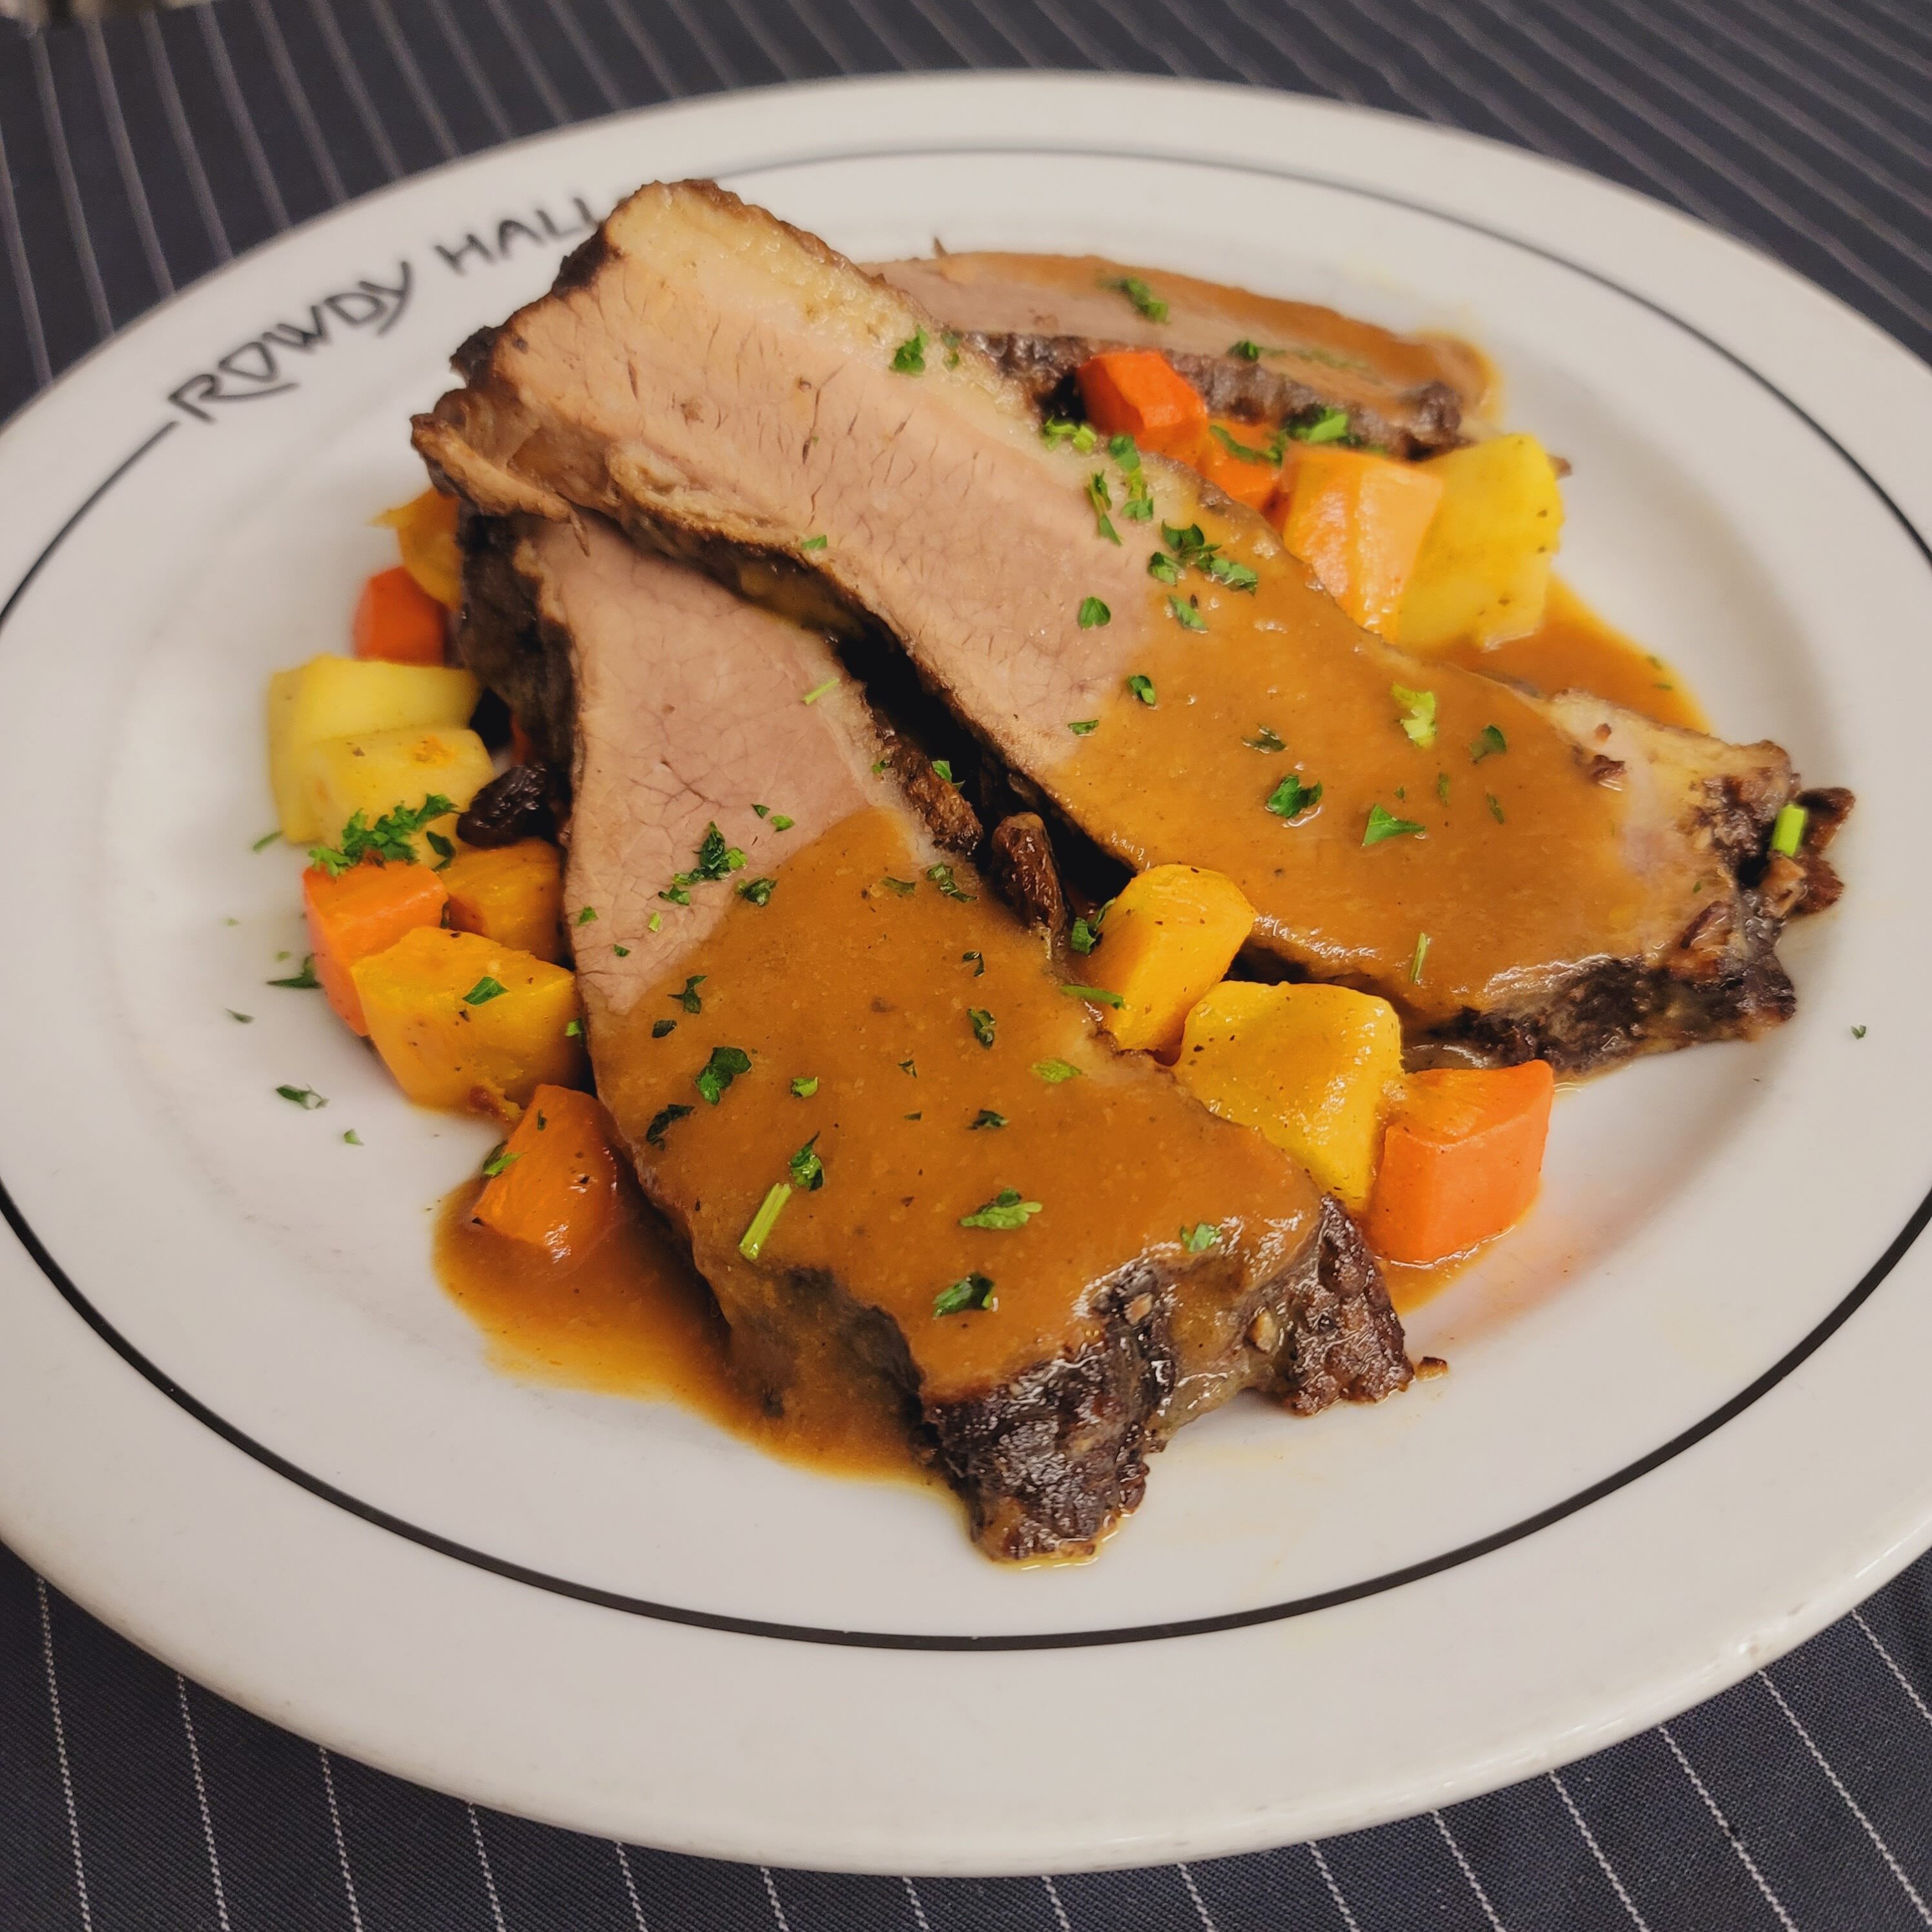 Rowdy Hall's Passover offerings include red wine braised brisket with sweet potato puree and roasted baby root vegetables. COURTESY ROWDY HALL